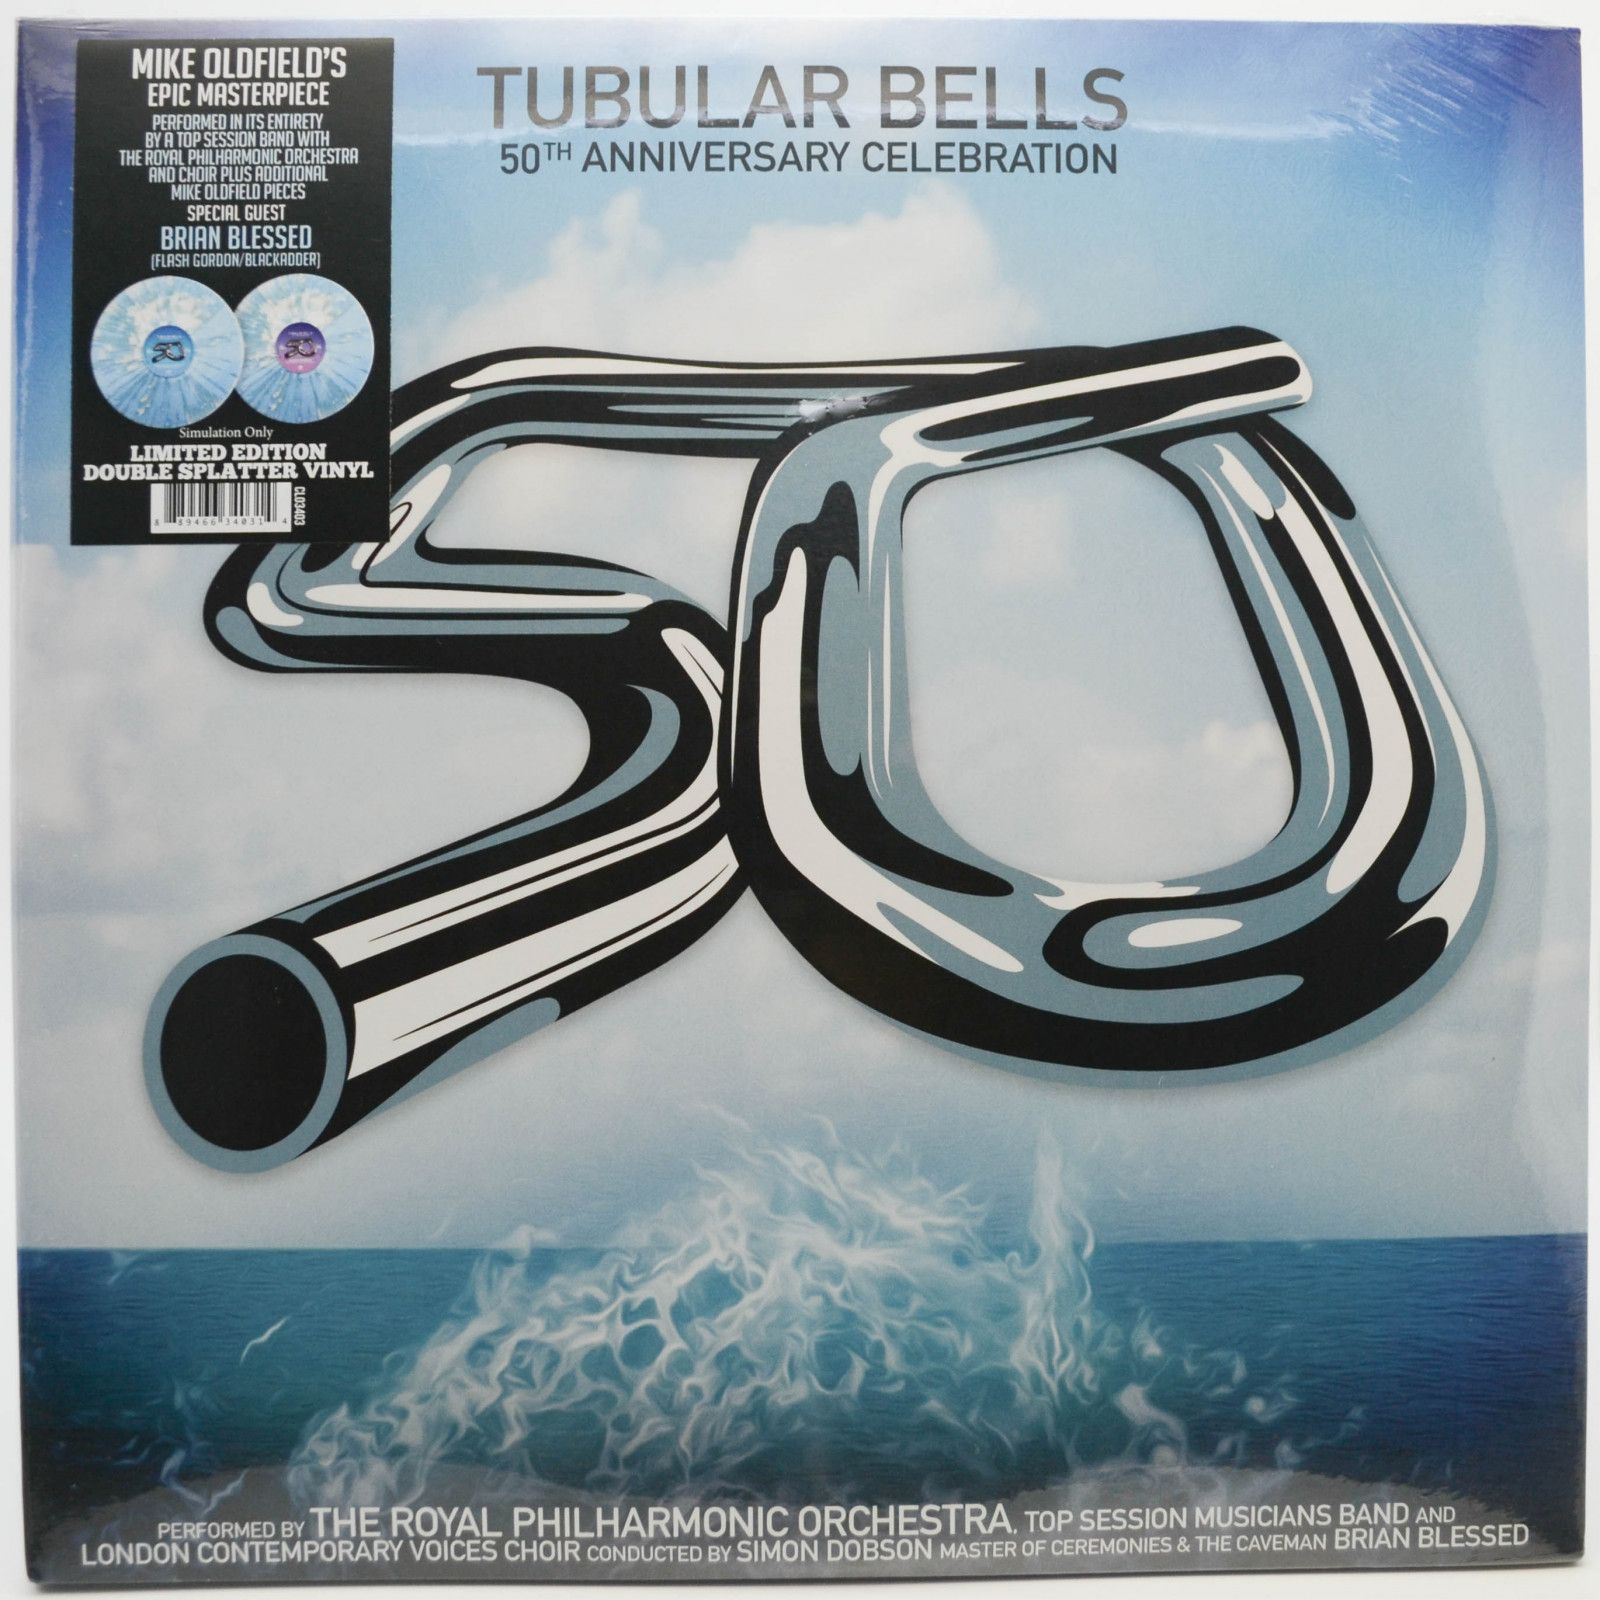 Royal Philharmonic Orchestra, London Contemporary Voices, Simon Dobson, Brian Blessed — Tubular Bells 50th Anniversary Celebration (2LP), 2022